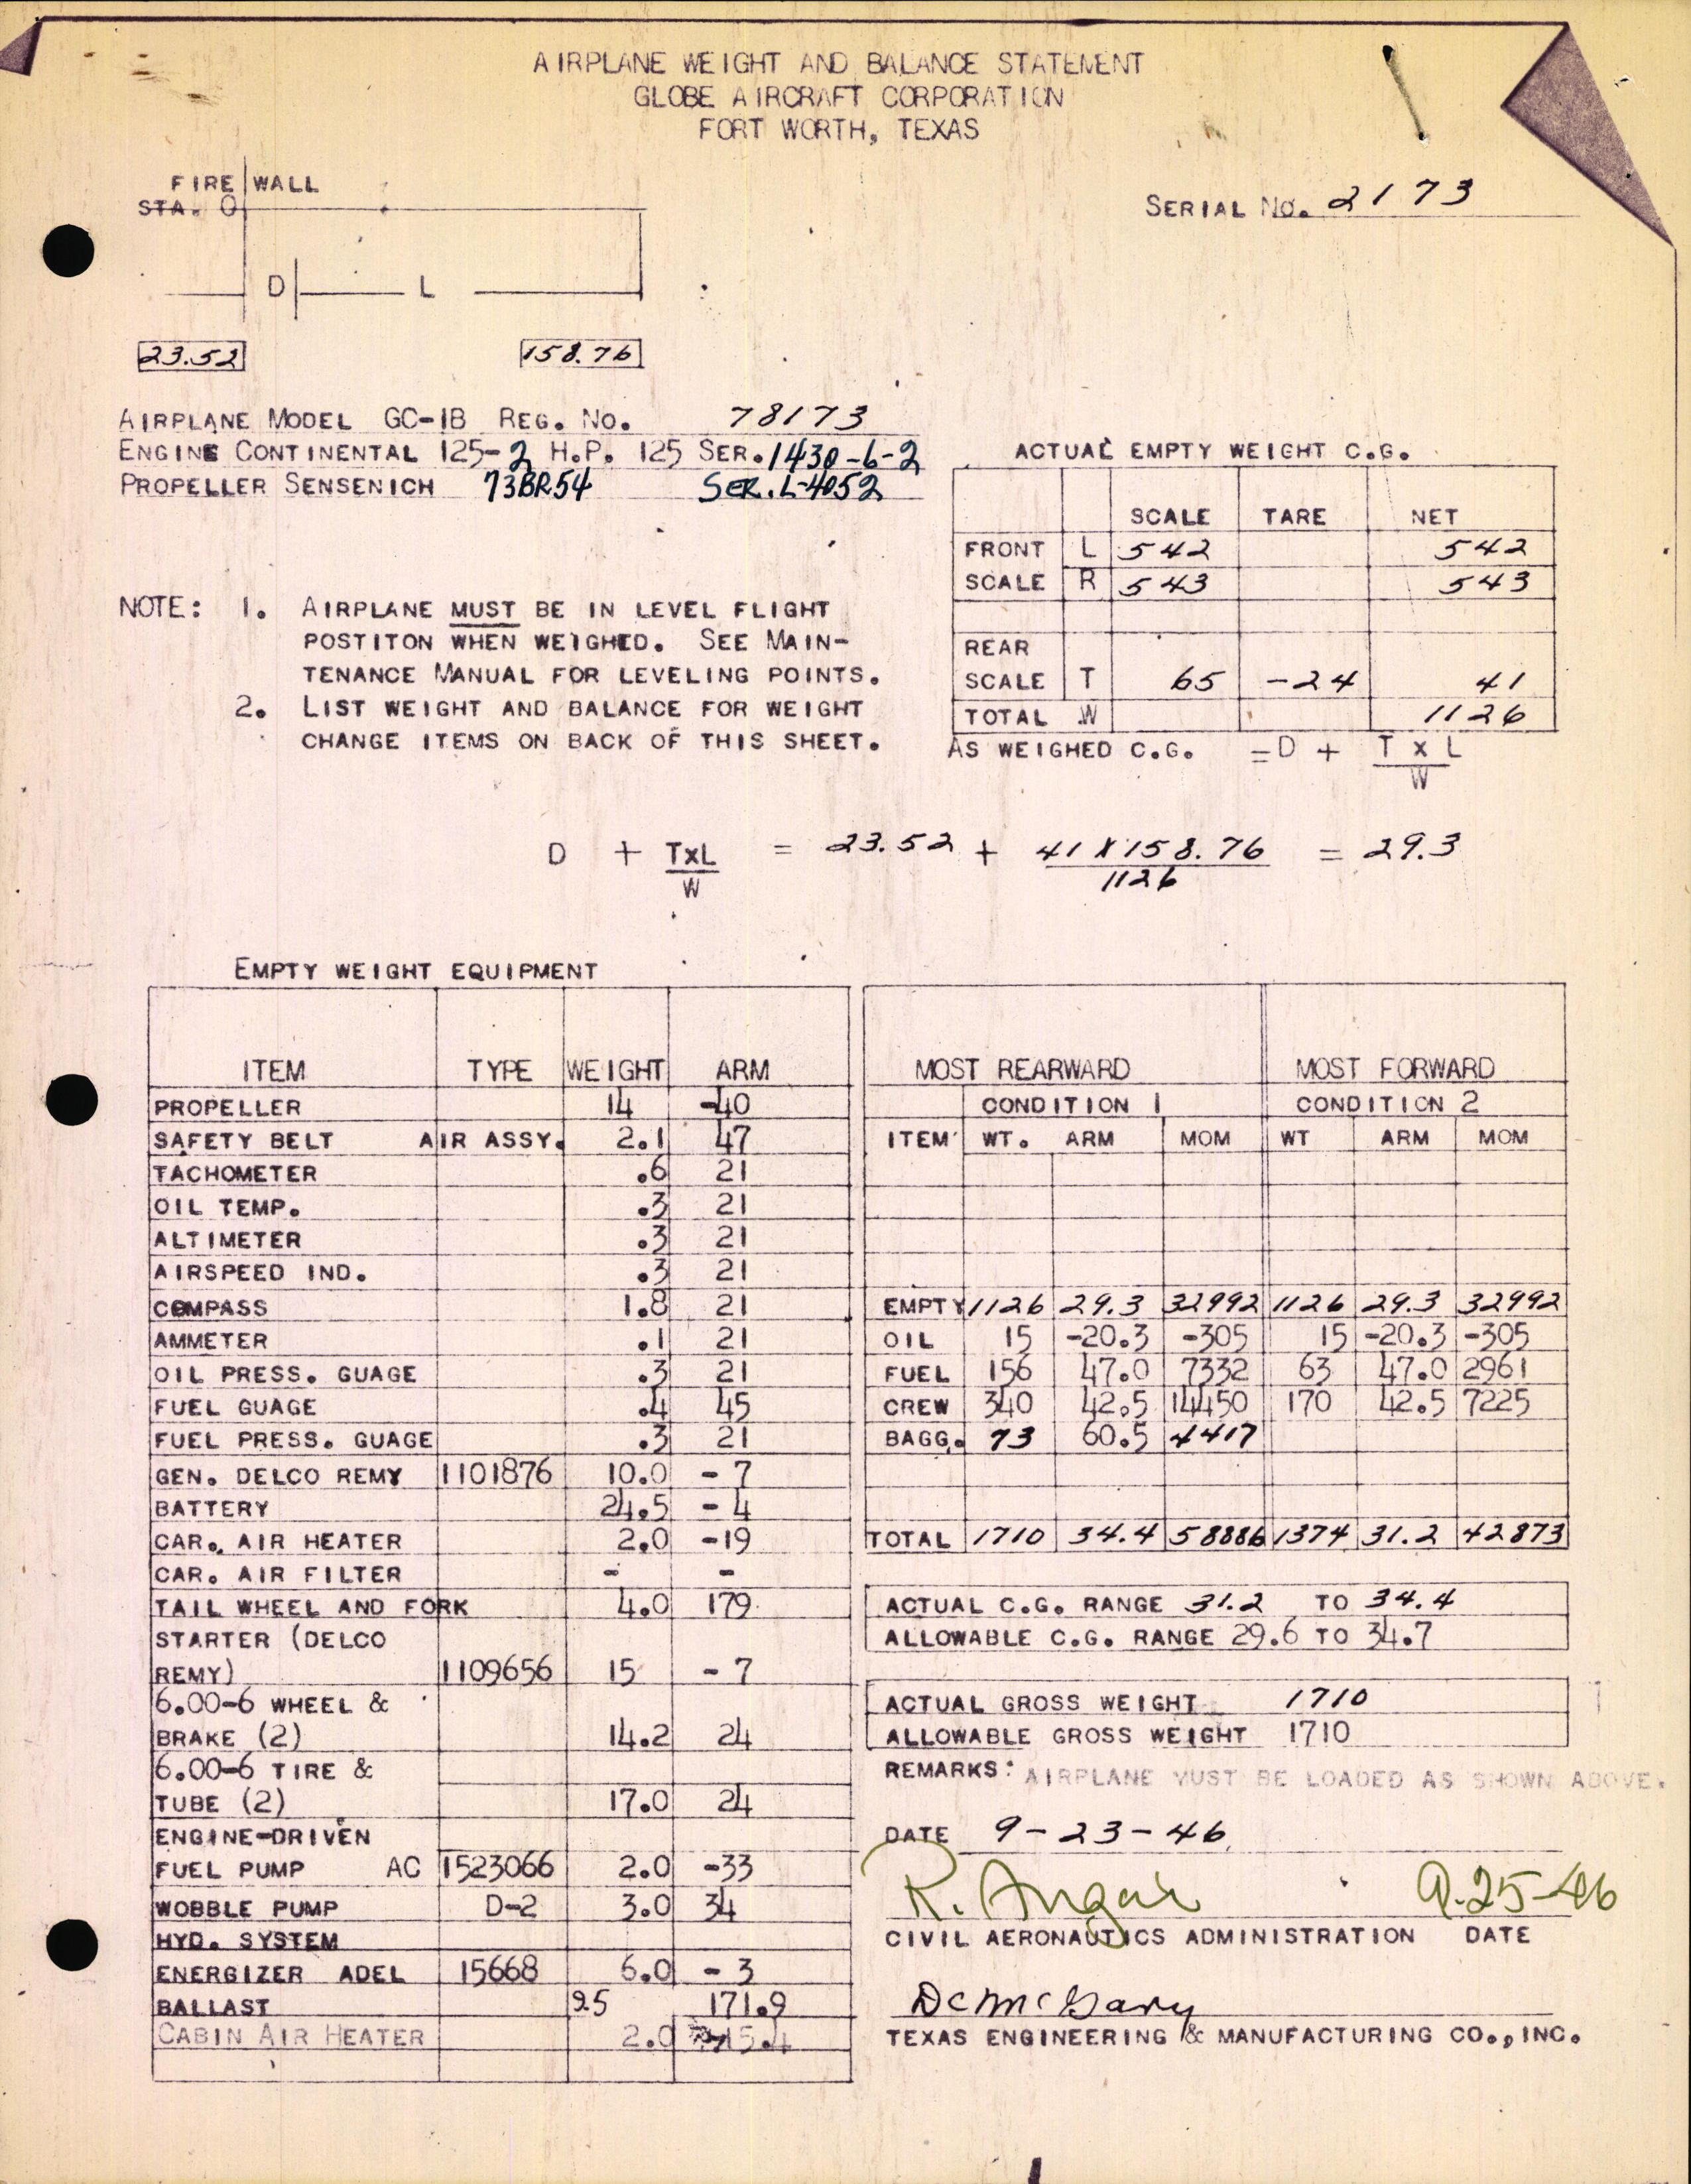 Sample page 1 from AirCorps Library document: Technical Information for Serial Number 2173